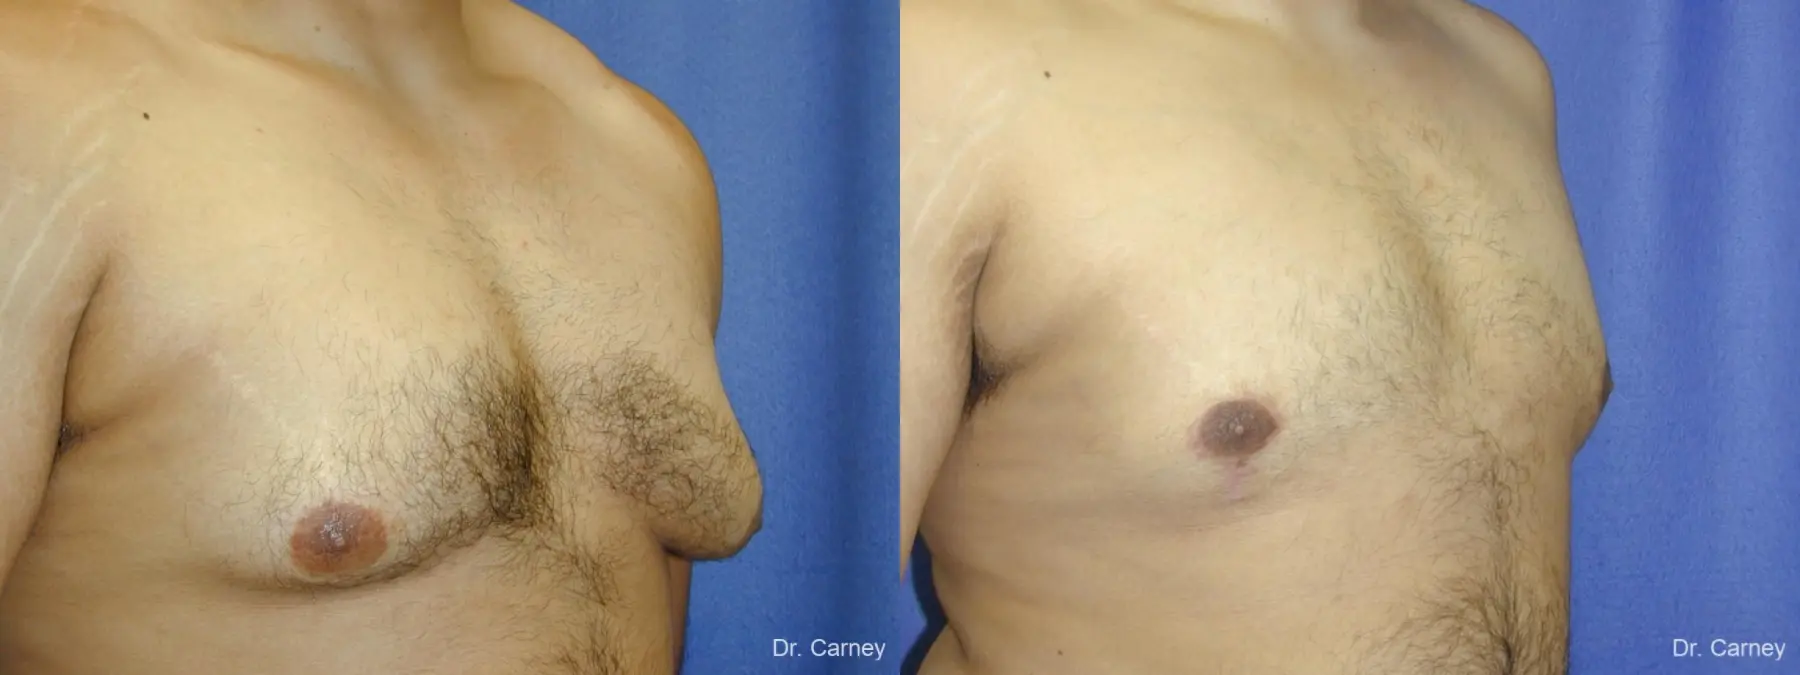 Virginia Beach Gynecomastia 1255 - Before and After 3